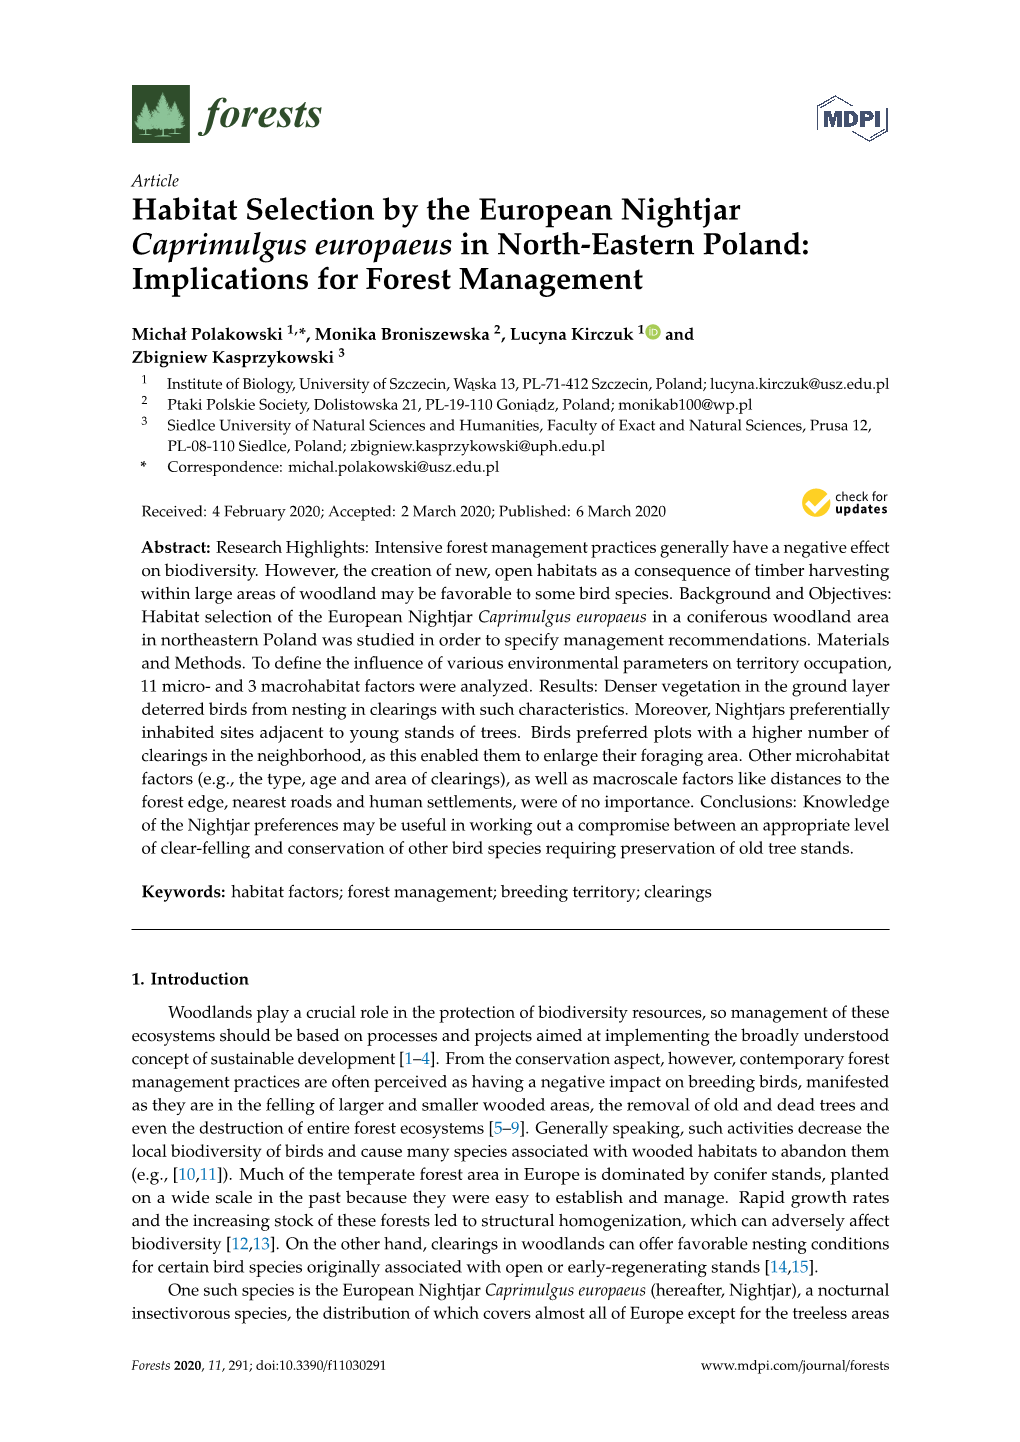 Habitat Selection by the European Nightjar Caprimulgus Europaeus in North-Eastern Poland: Implications for Forest Management